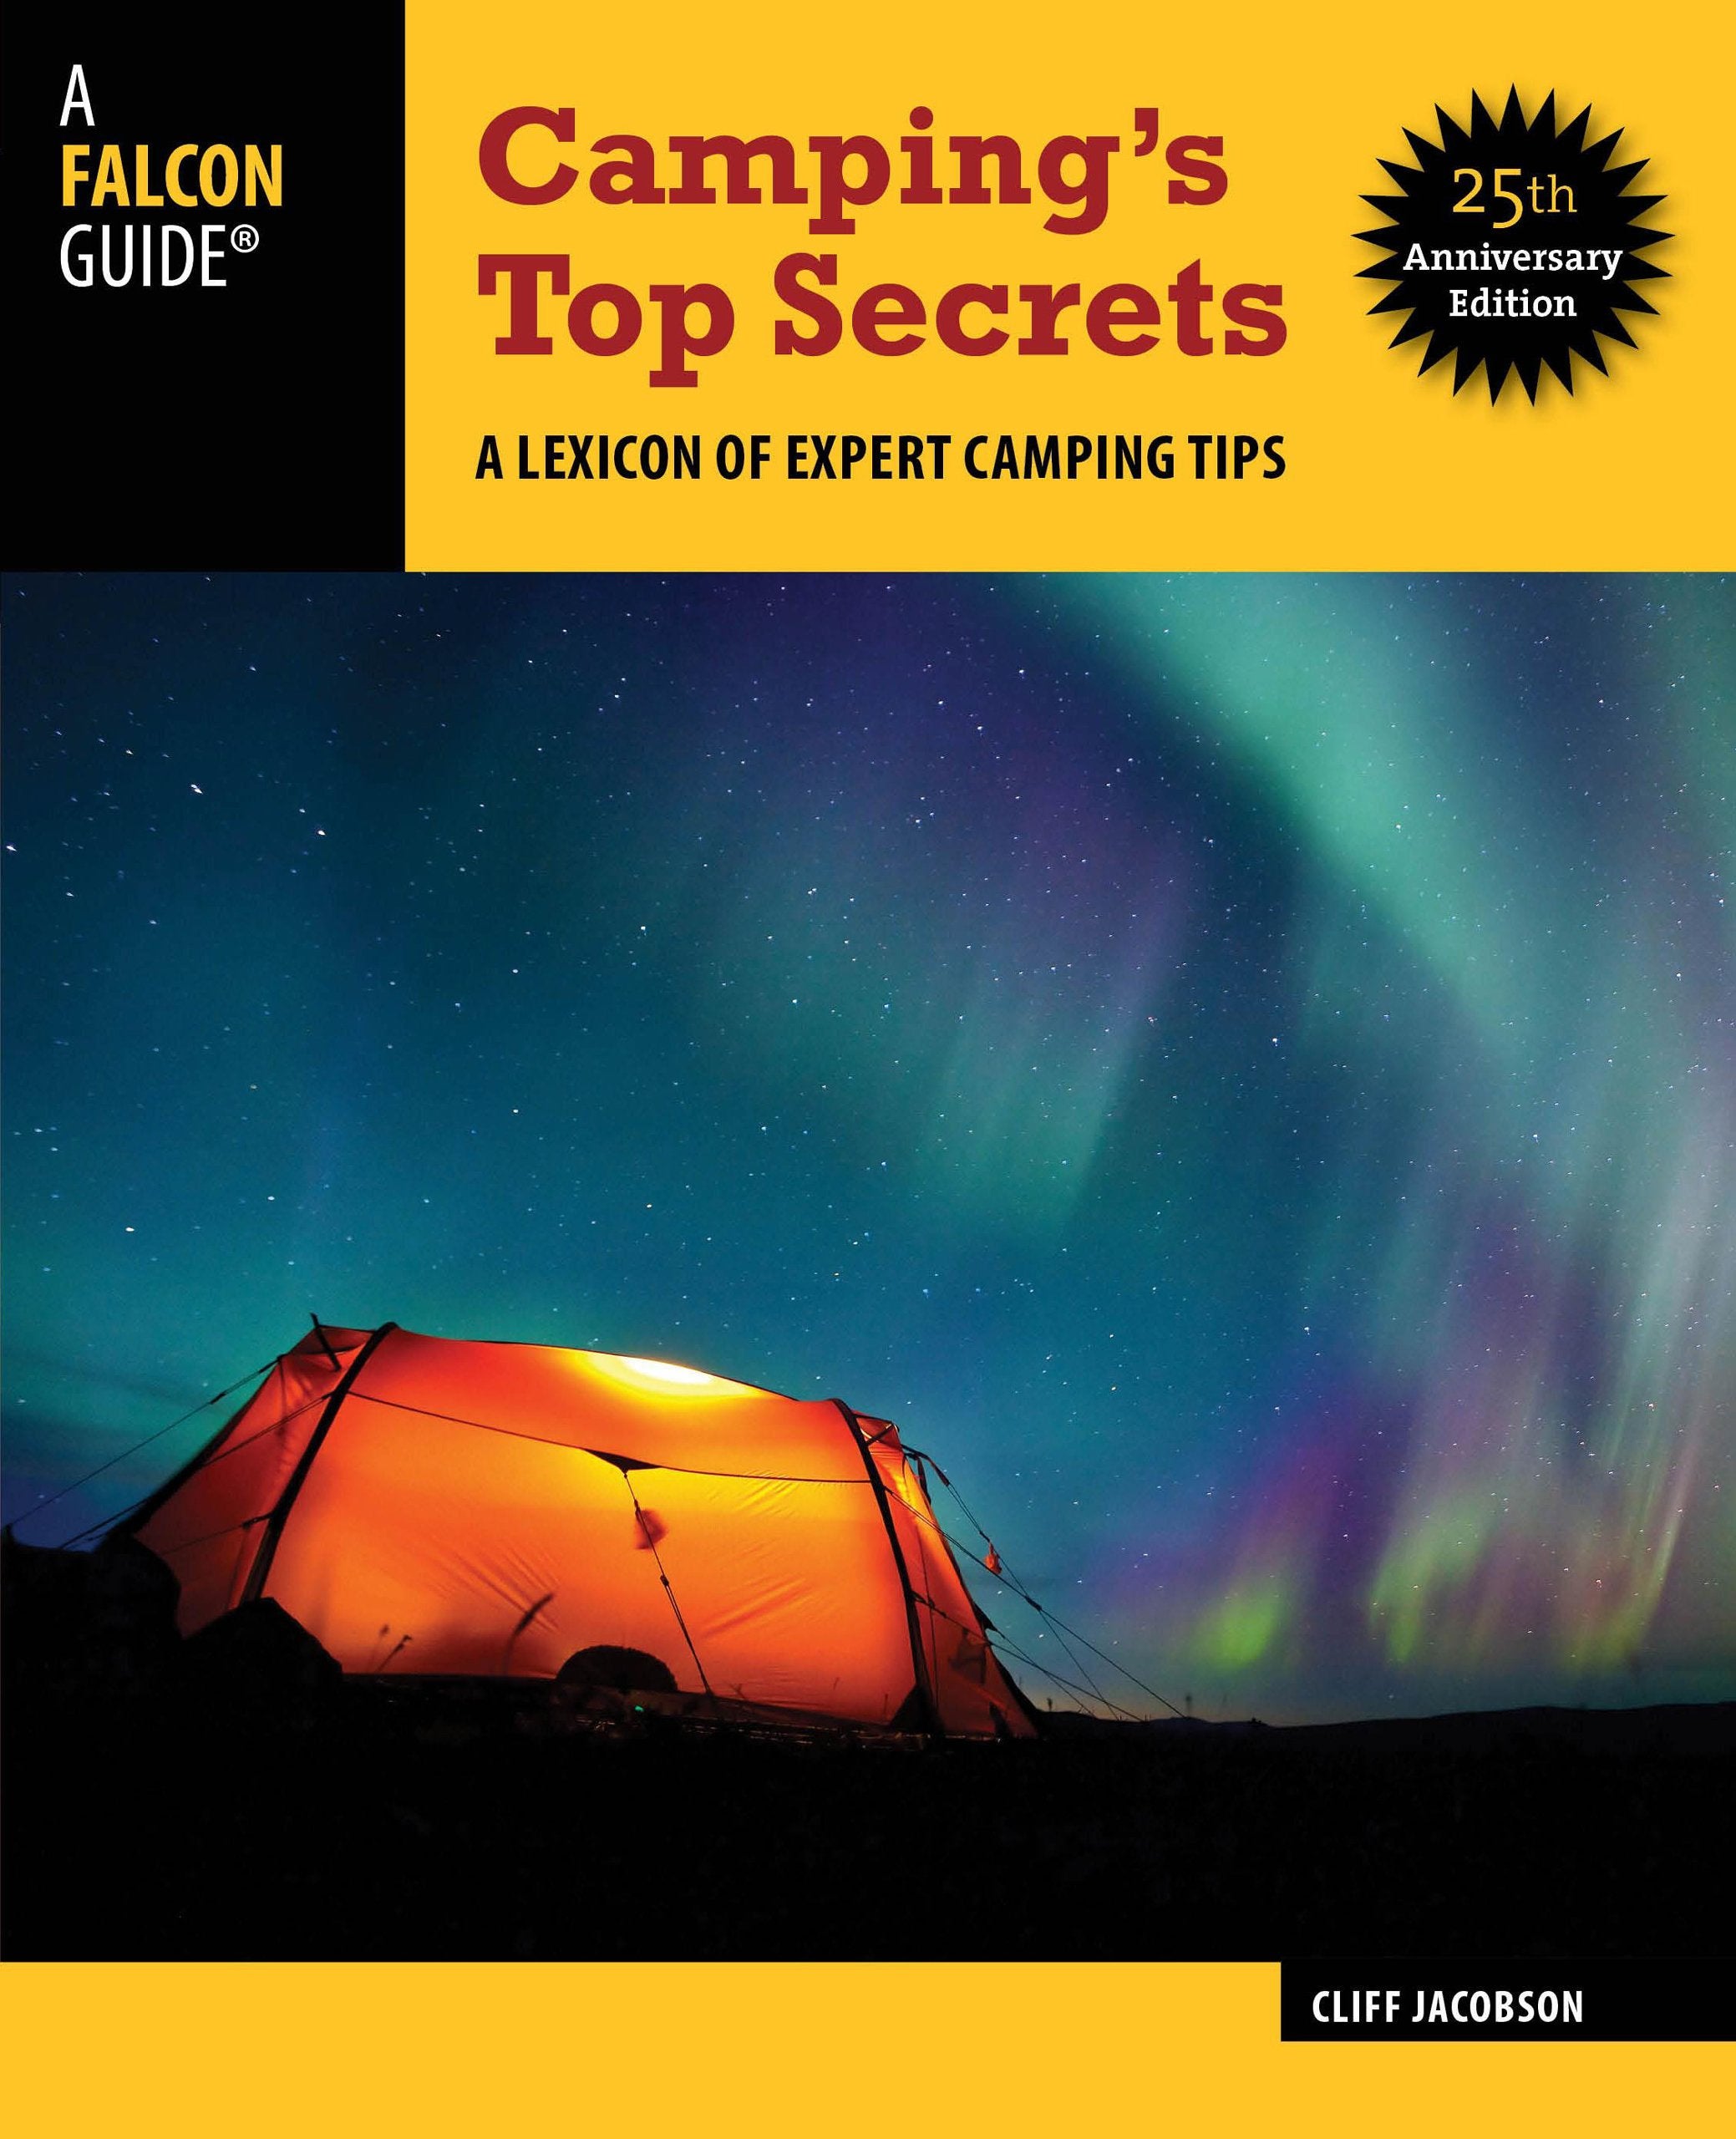 Camping's Top Secrets: A Lexicon of Camping Tips Only the Experts Know